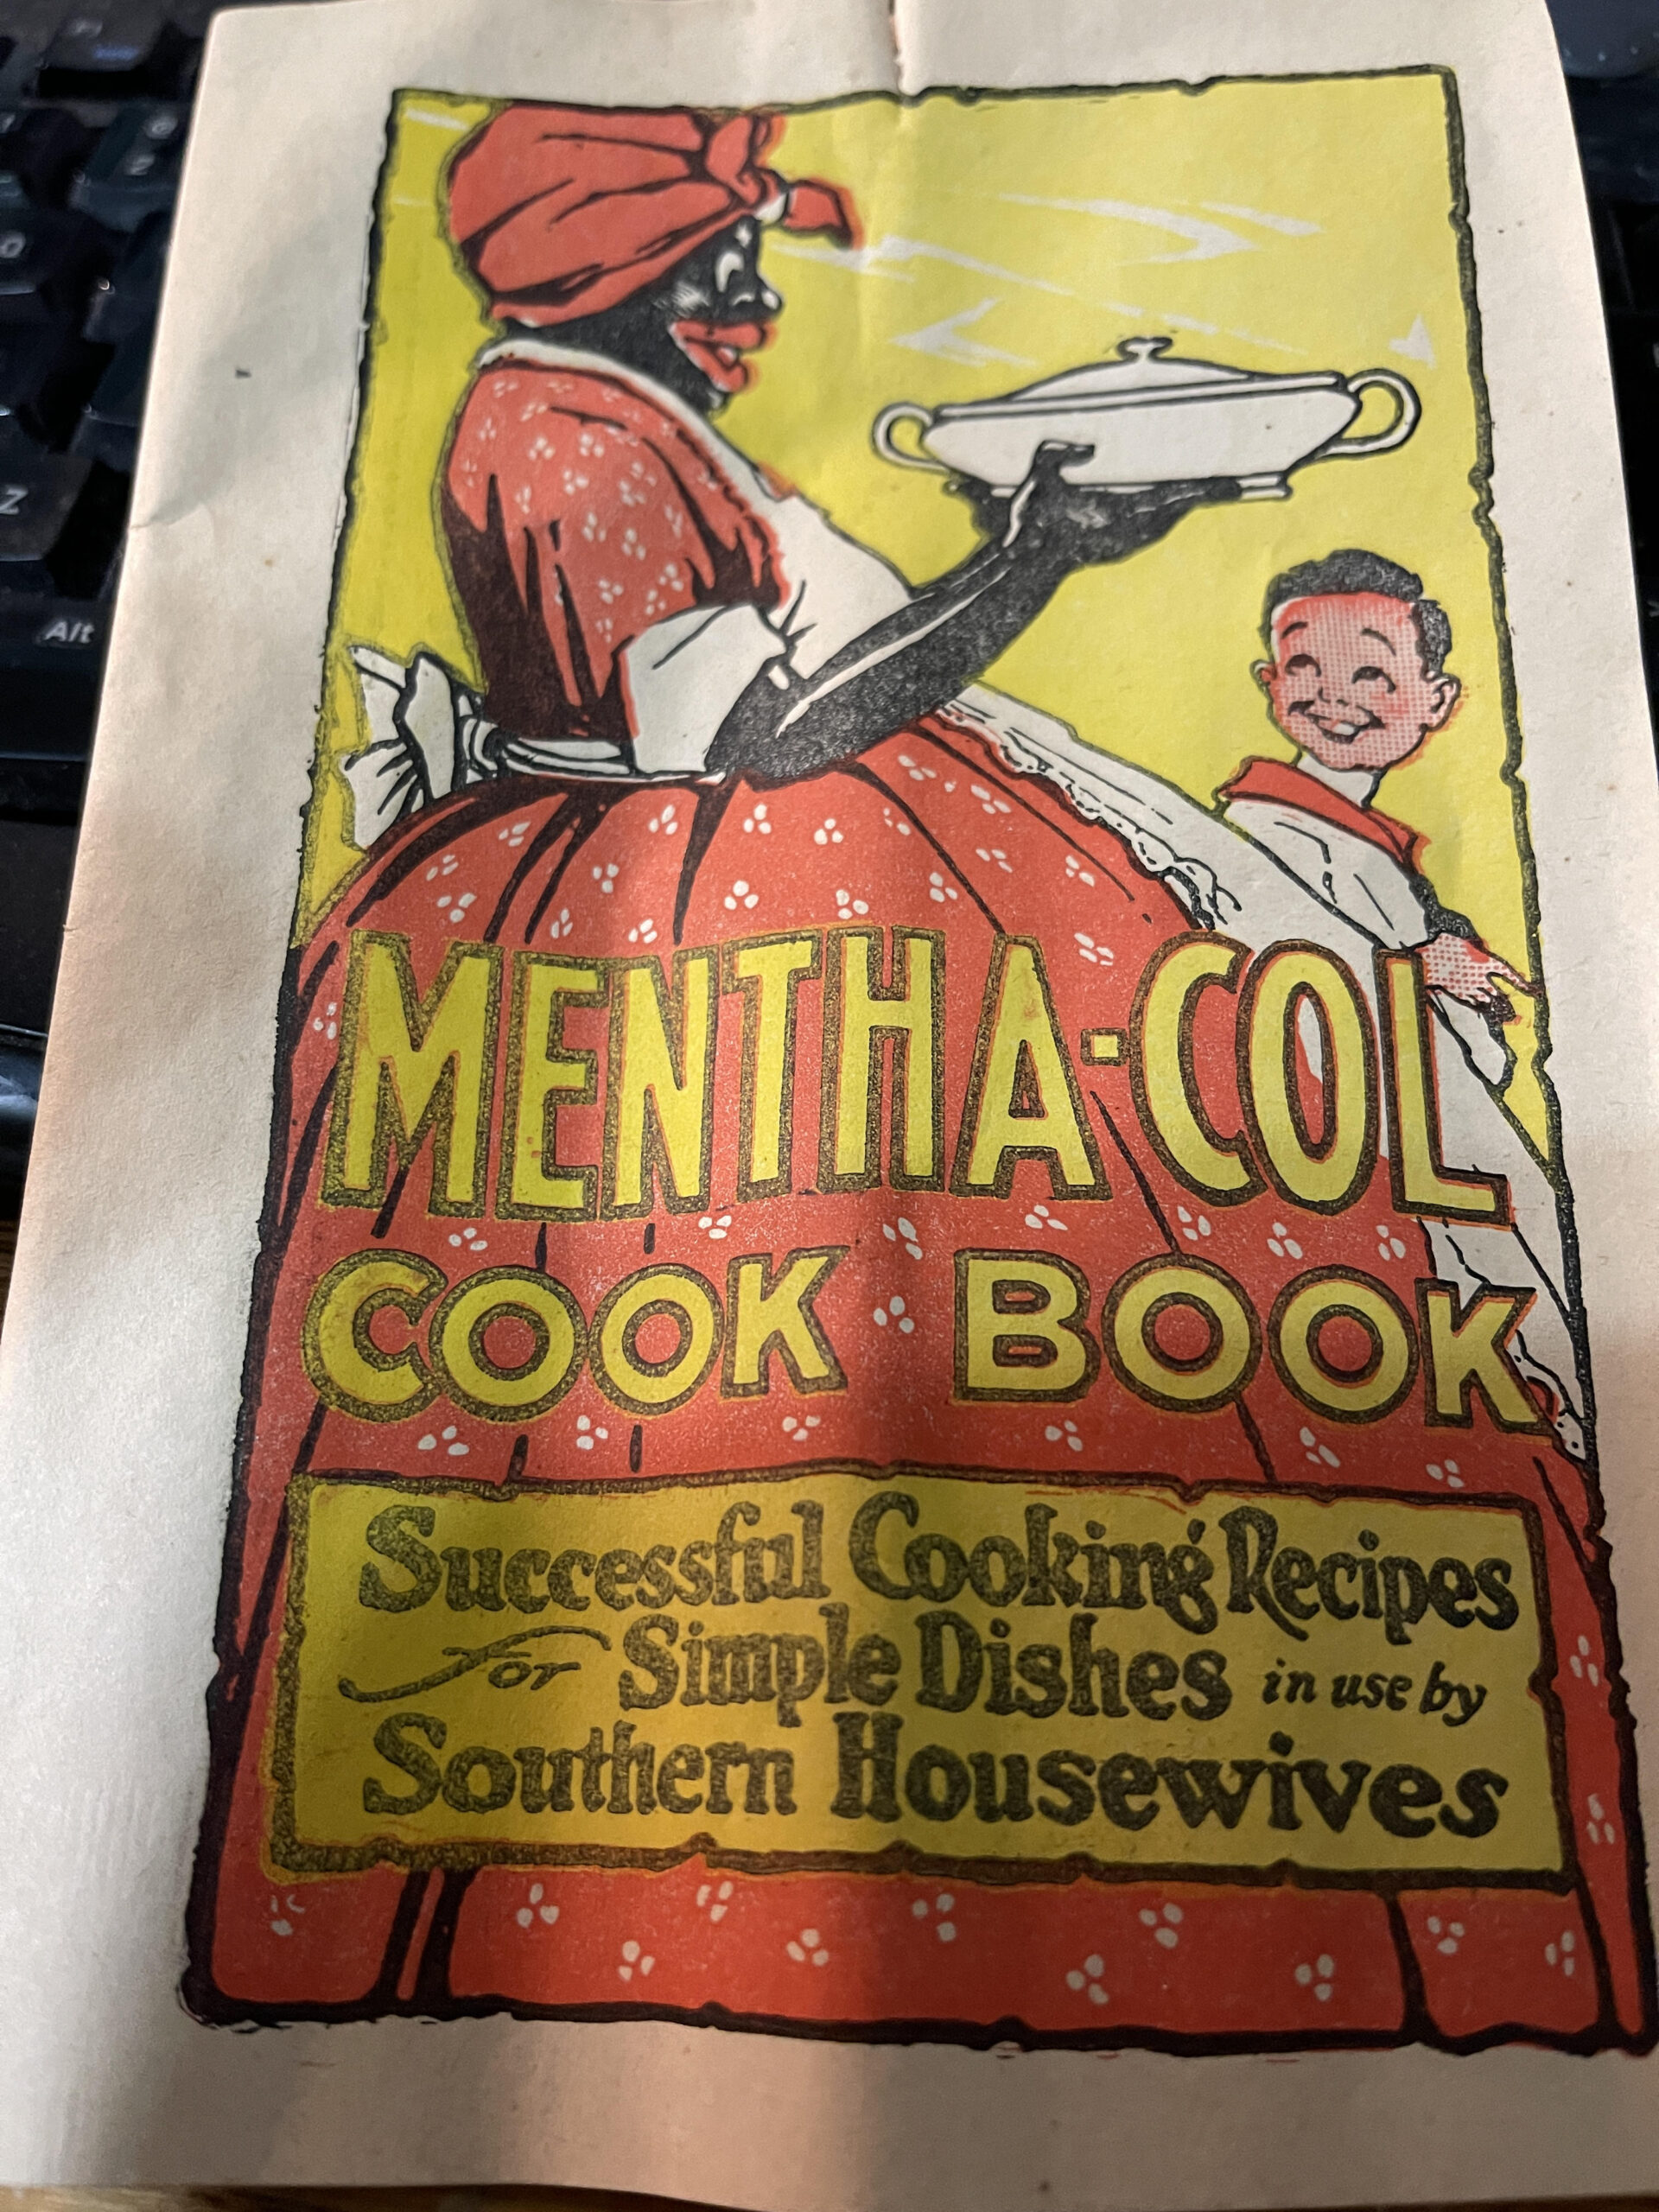 There's nothing like Revere Warefor good cooking. 1953. : r